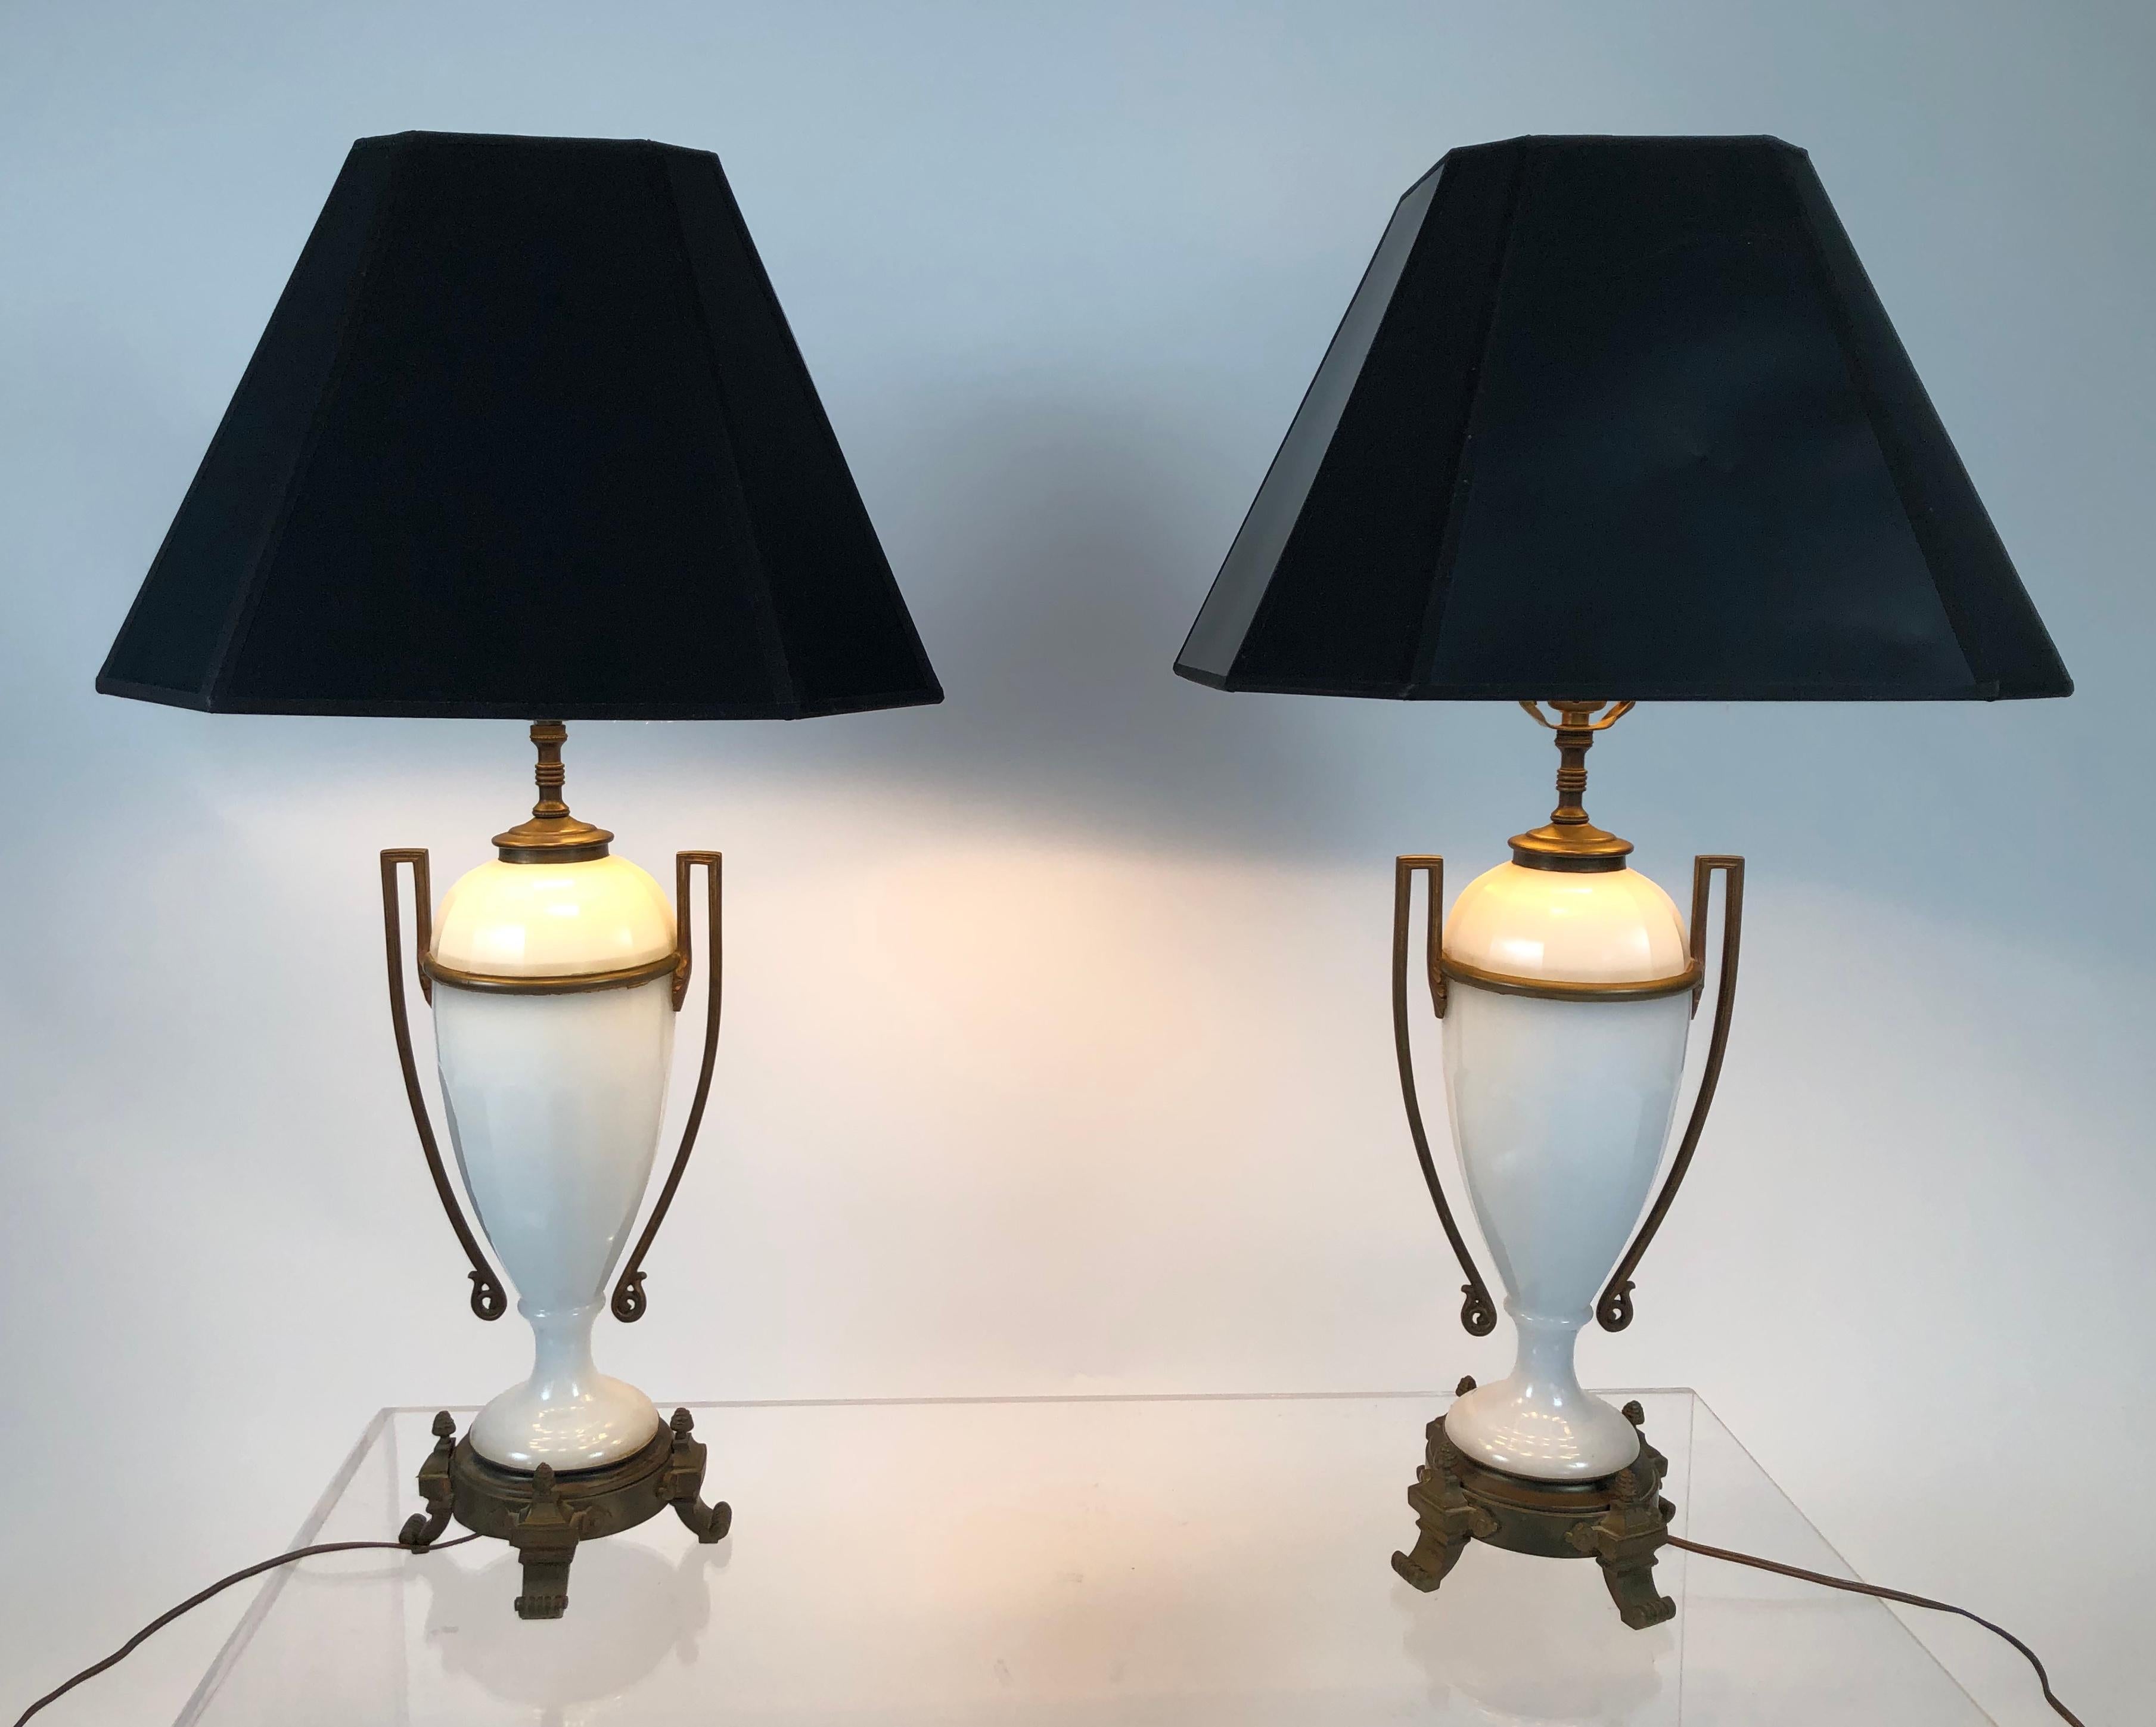 Early 20th Century Pair of Louis XVI Style Neoclassical White Opaline Glass and Ormolu Lamps